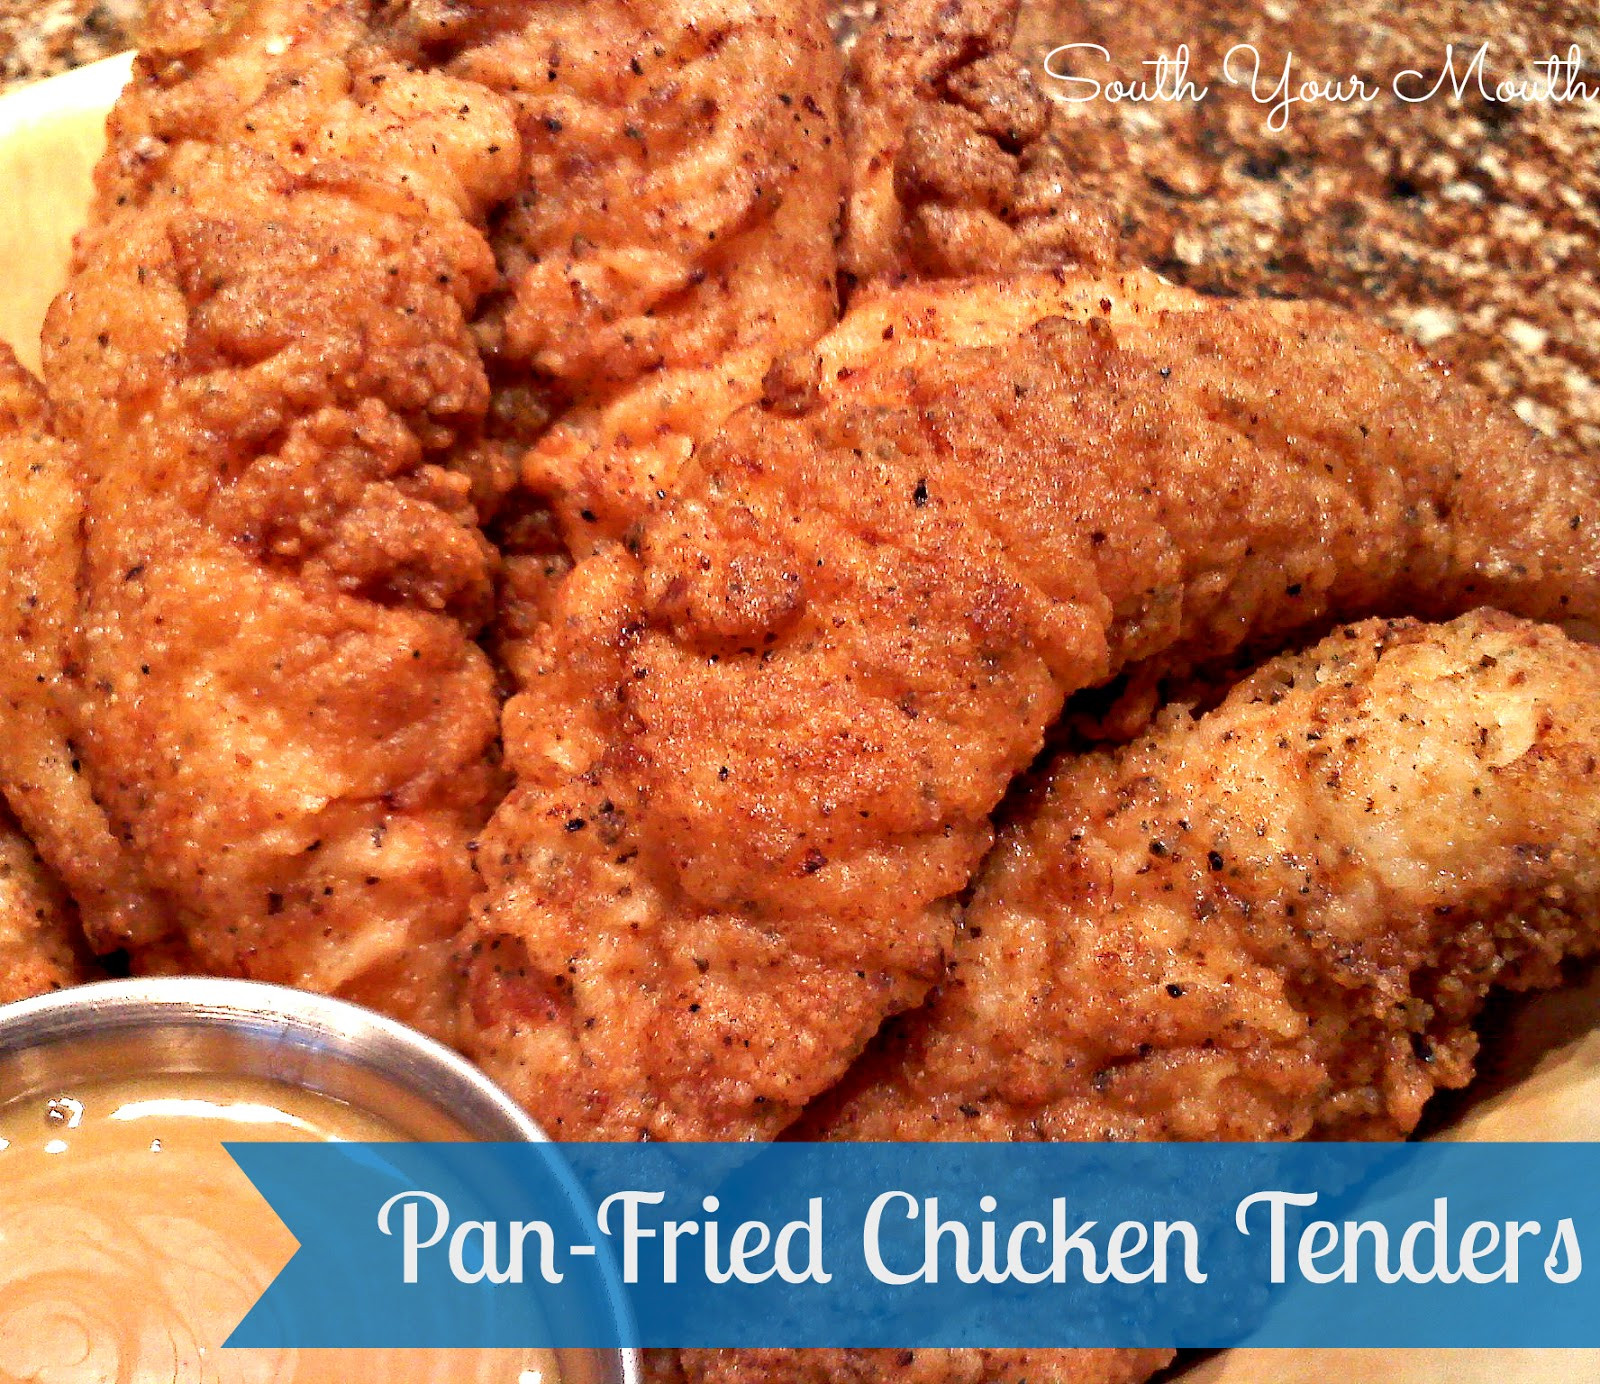 Fried Chicken Tender Recipes
 South Your Mouth Pan Fried Chicken Tenders